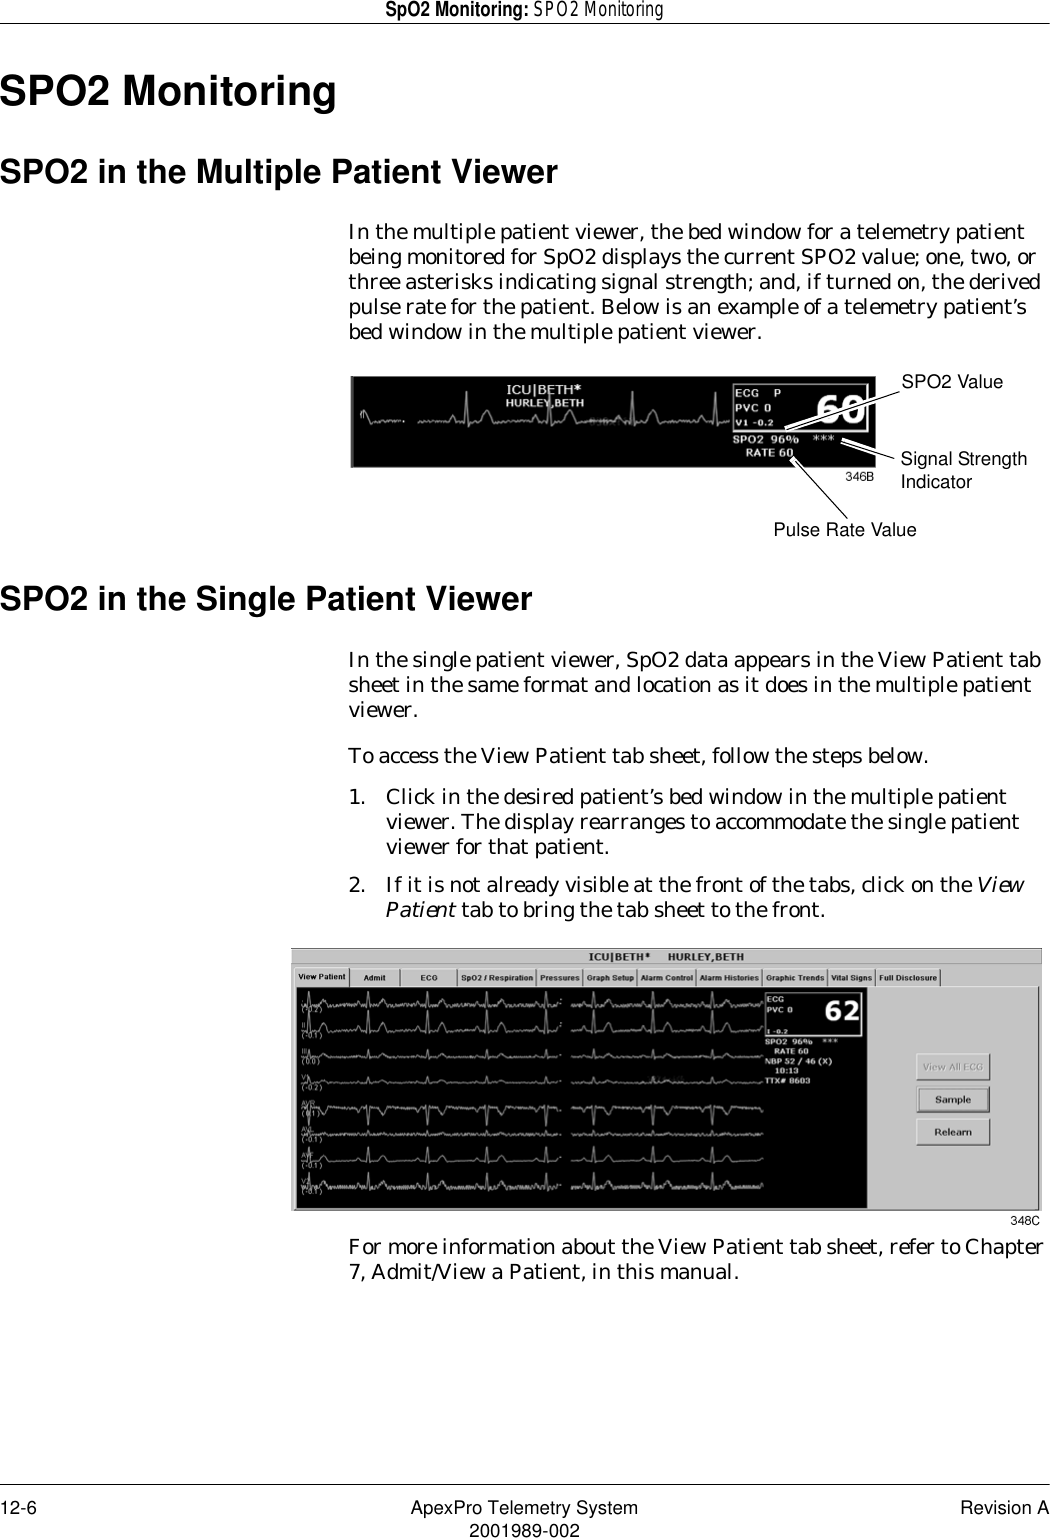 12-6 ApexPro Telemetry System Revision A2001989-002SpO2 Monitoring: SPO2 MonitoringSPO2 MonitoringSPO2 in the Multiple Patient ViewerIn the multiple patient viewer, the bed window for a telemetry patient being monitored for SpO2 displays the current SPO2 value; one, two, or three asterisks indicating signal strength; and, if turned on, the derived pulse rate for the patient. Below is an example of a telemetry patient’s bed window in the multiple patient viewer.SPO2 in the Single Patient ViewerIn the single patient viewer, SpO2 data appears in the View Patient tab sheet in the same format and location as it does in the multiple patient viewer.To access the View Patient tab sheet, follow the steps below.1. Click in the desired patient’s bed window in the multiple patient viewer. The display rearranges to accommodate the single patient viewer for that patient.2. If it is not already visible at the front of the tabs, click on the View Patient tab to bring the tab sheet to the front.For more information about the View Patient tab sheet, refer to Chapter 7, Admit/View a Patient, in this manual.Signal Strength IndicatorSPO2 ValuePulse Rate Value